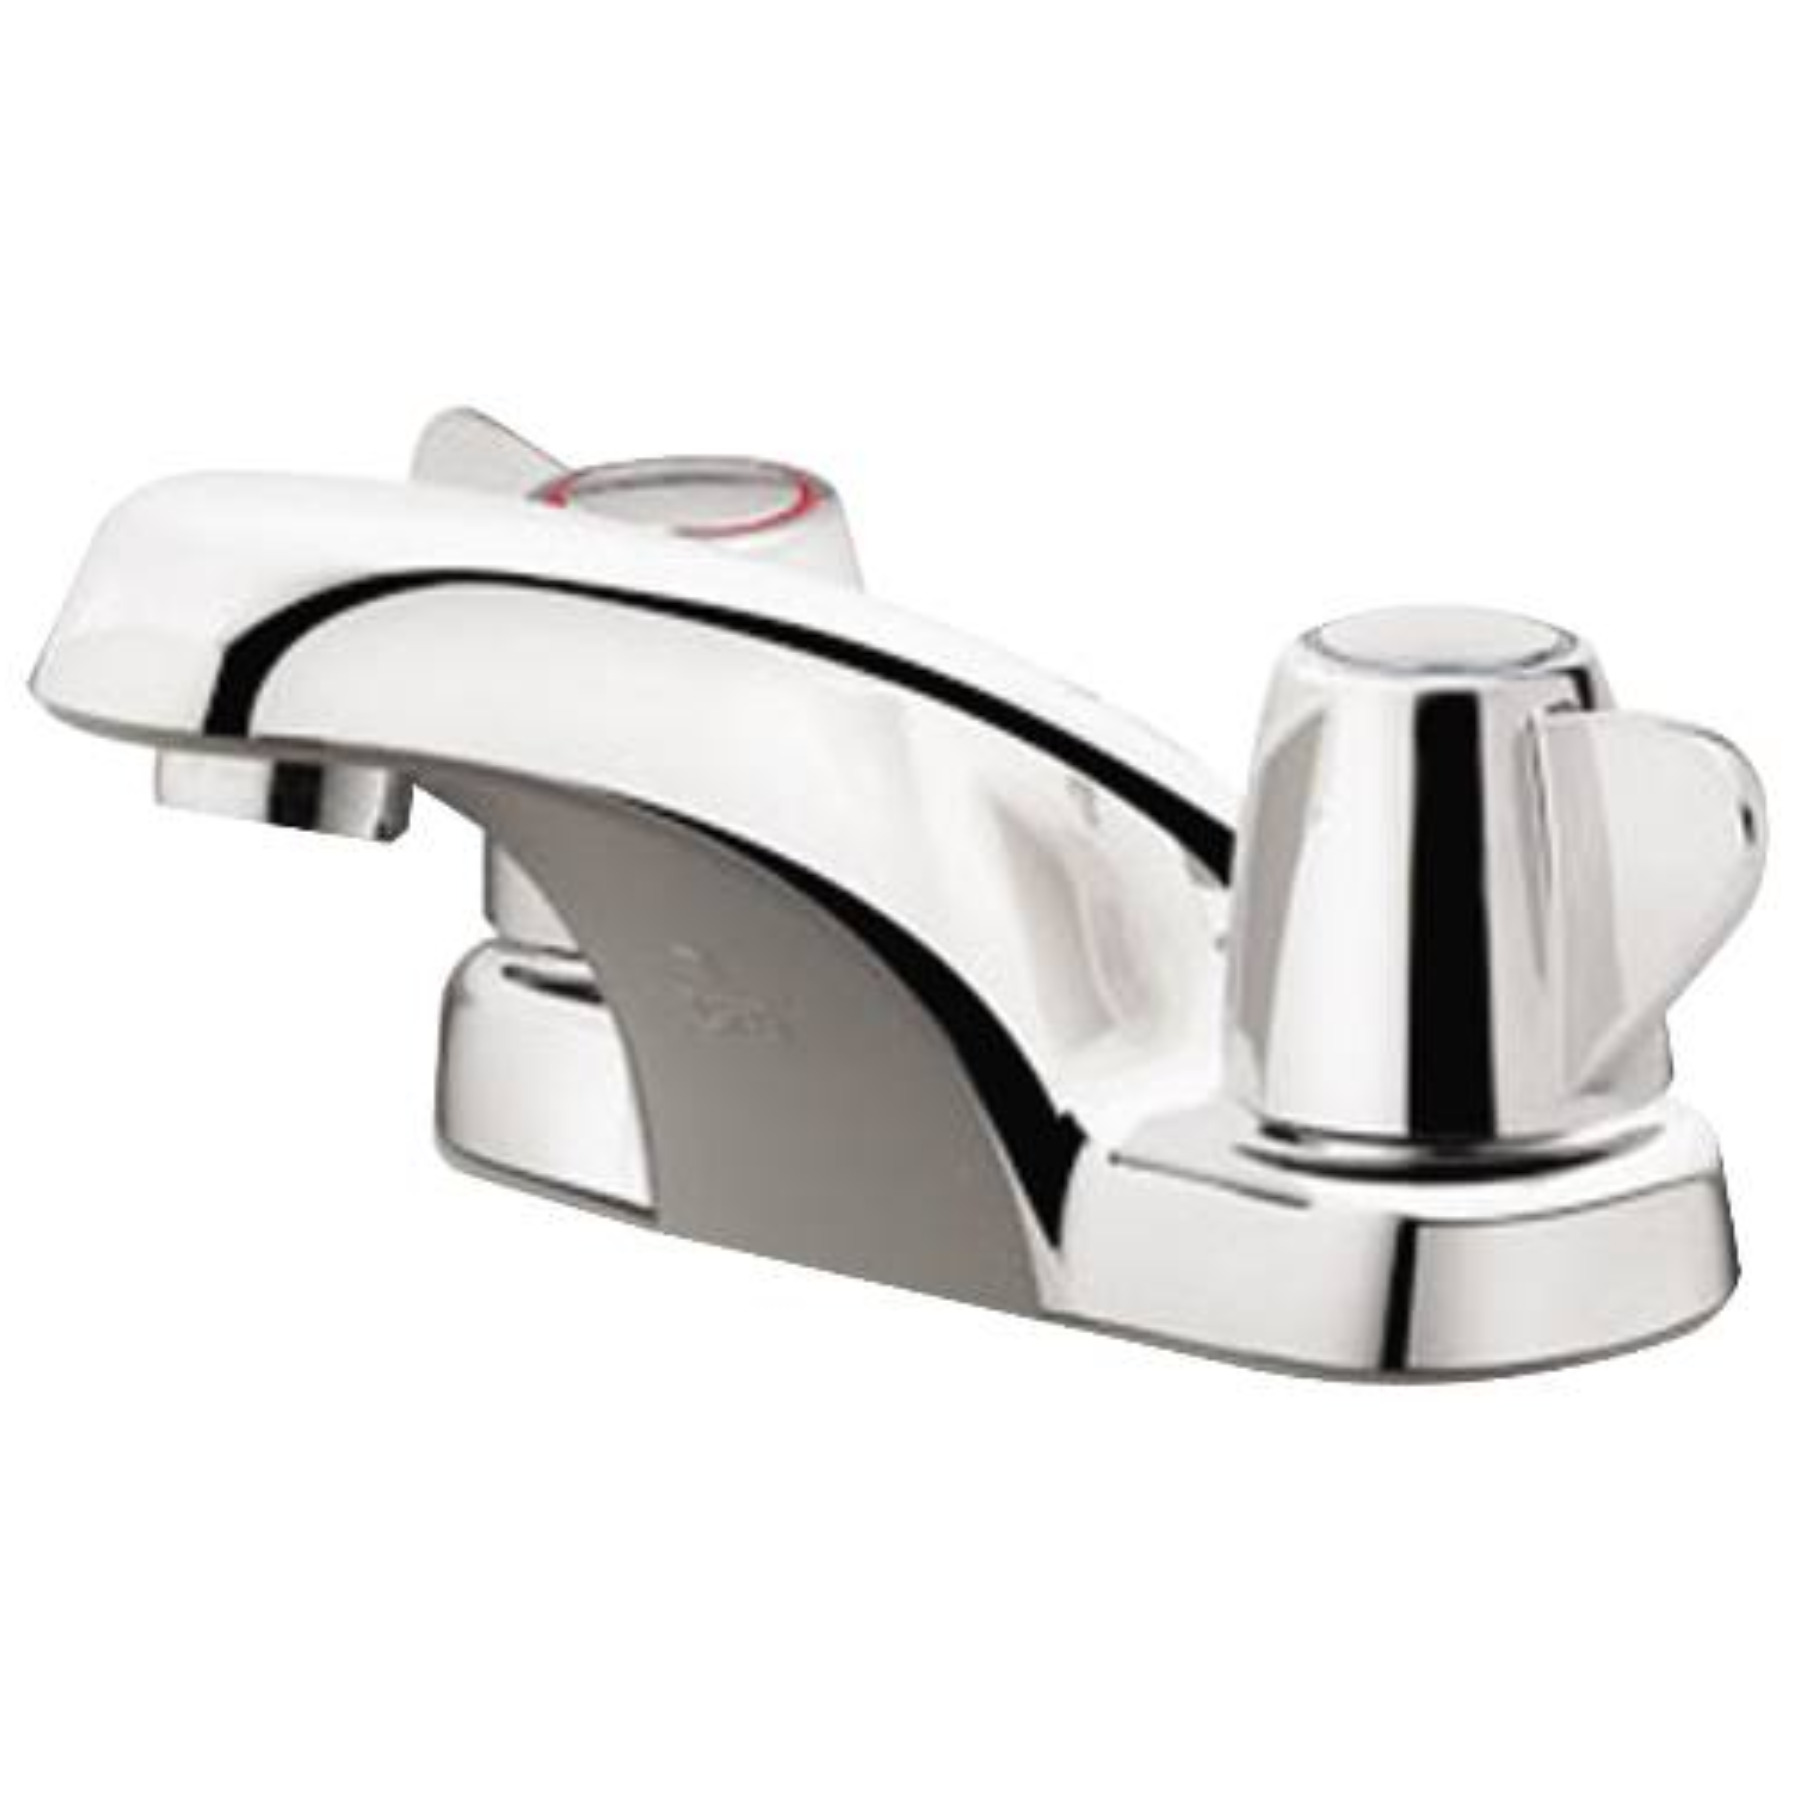 CFG CORNERSTONE� BATHROOM FAUCET, TWO HANDLE, WITHOUT WASTE, CHROME, LEAD FREE, 1.2 GPM